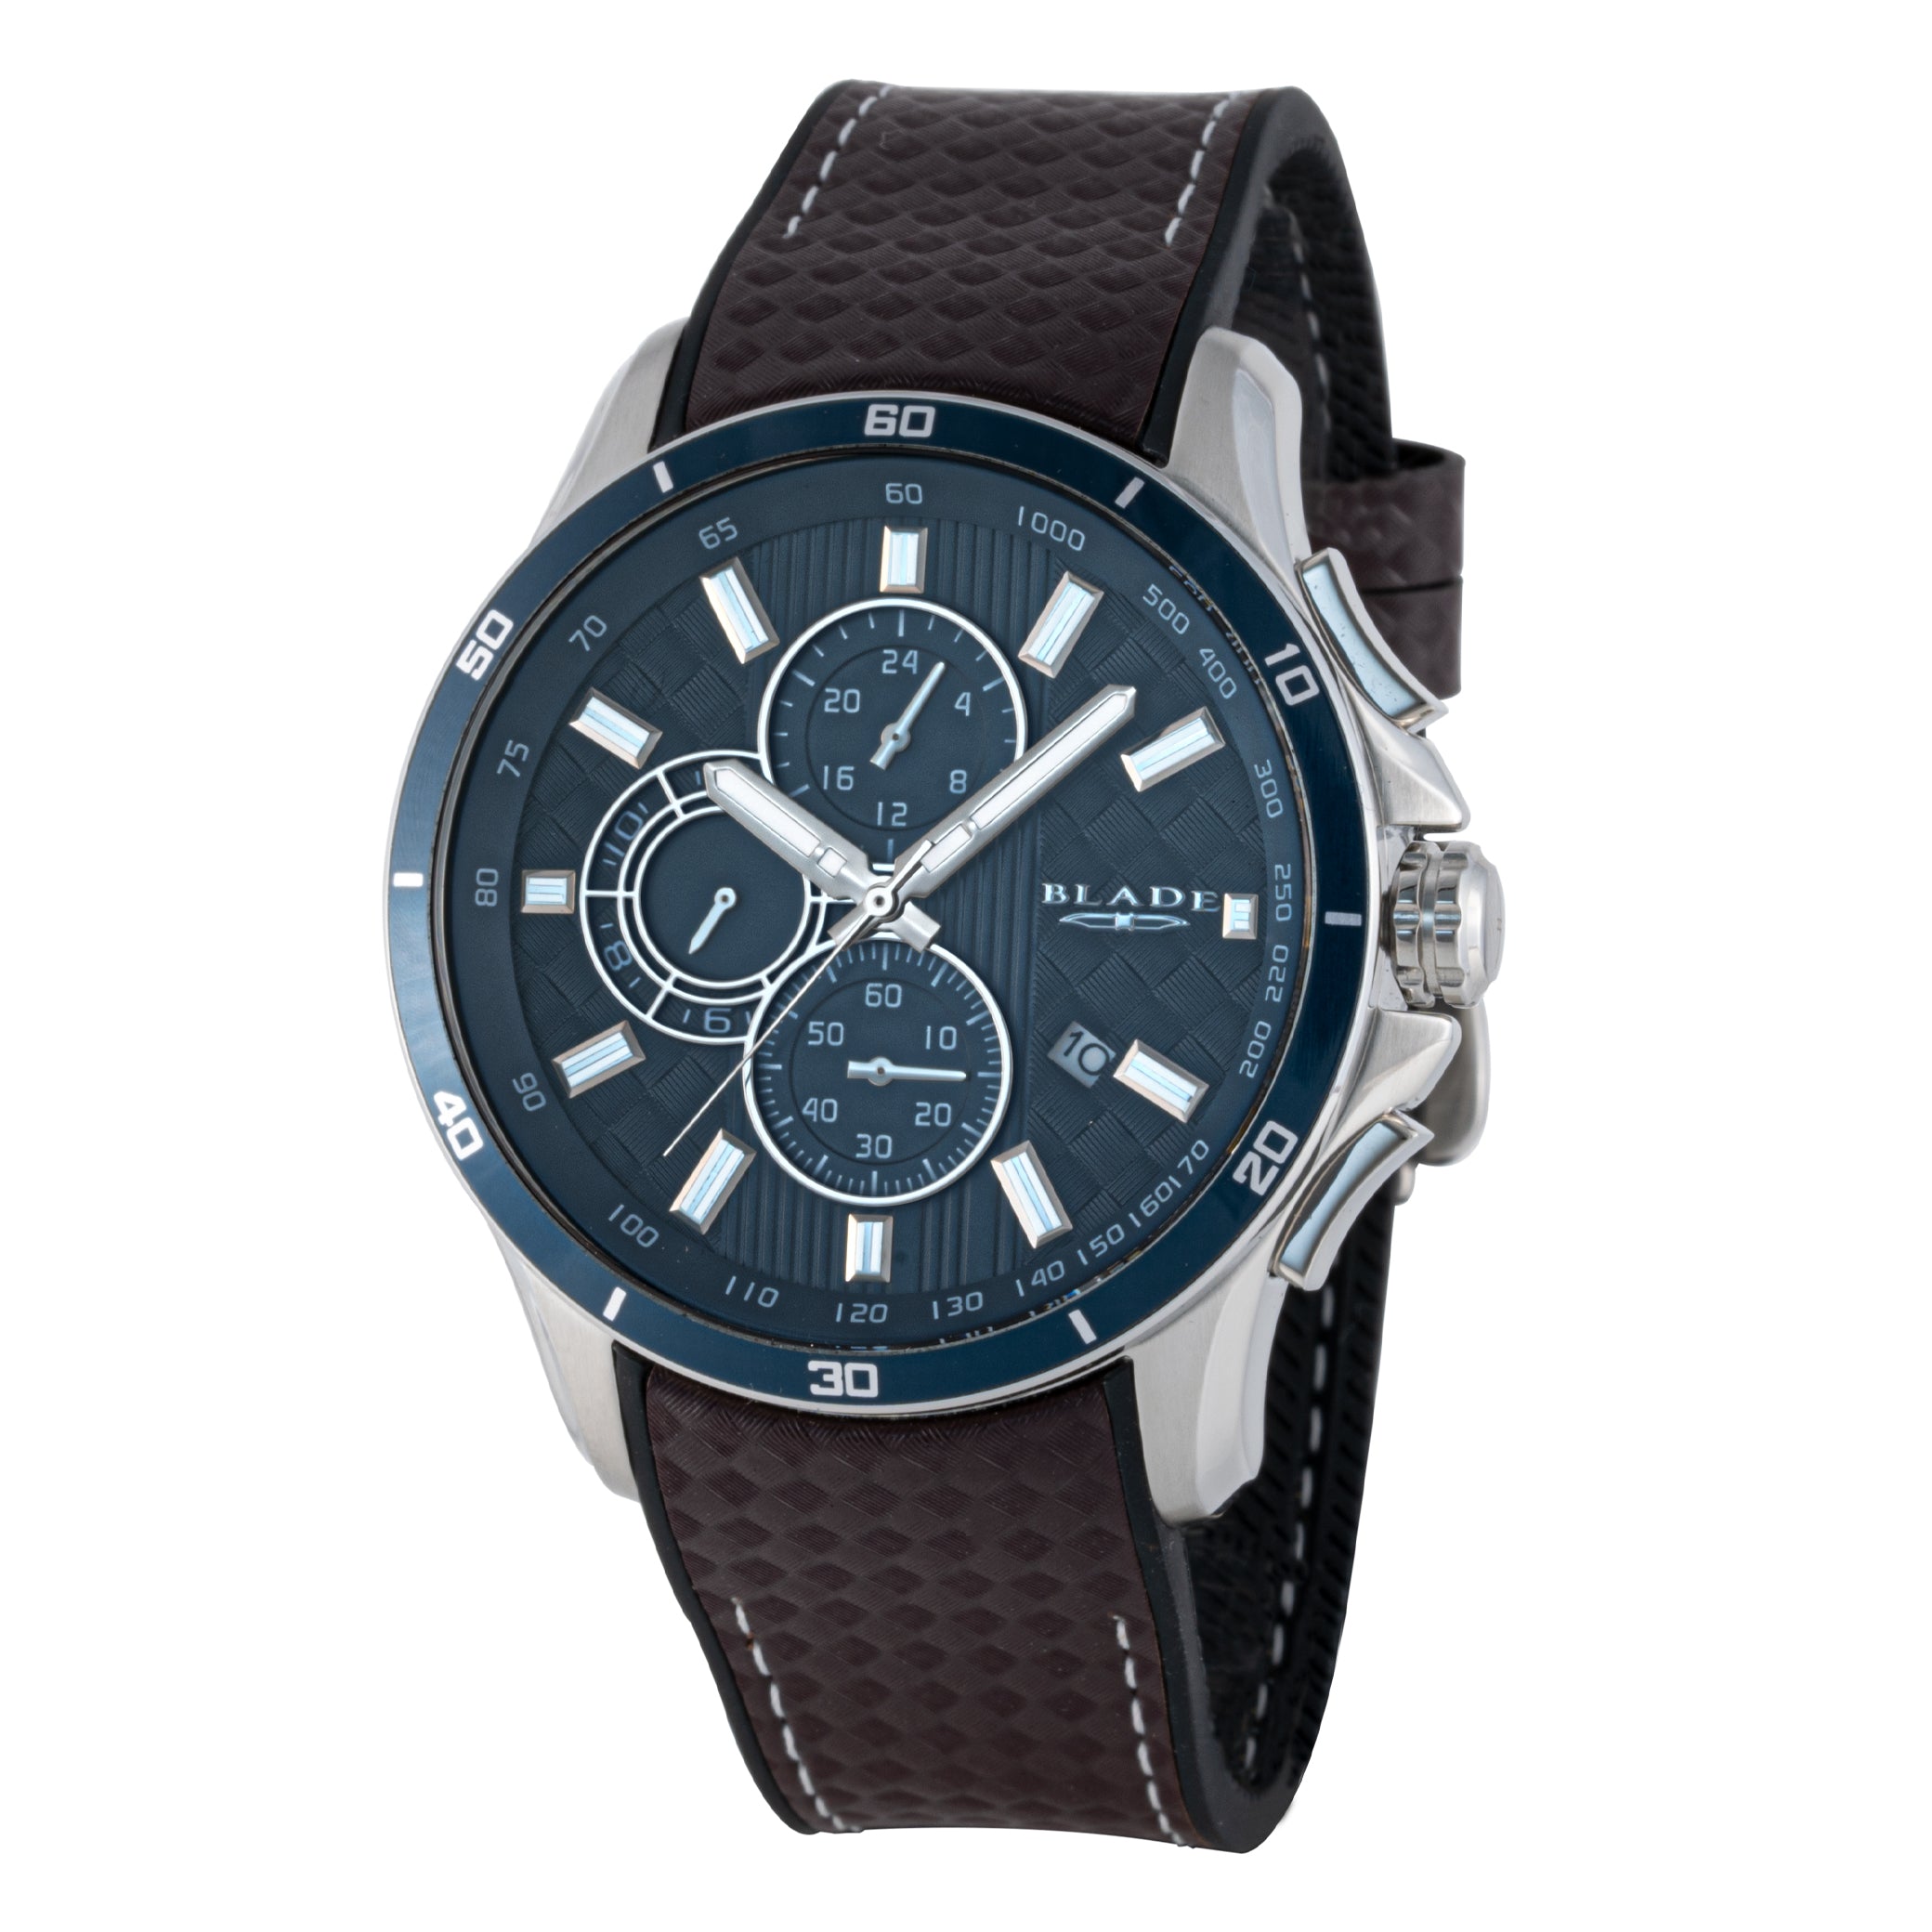 BLADE Vision Carbon Blue 3670G9ZBO SS & Leather Multifunction Men's Watch